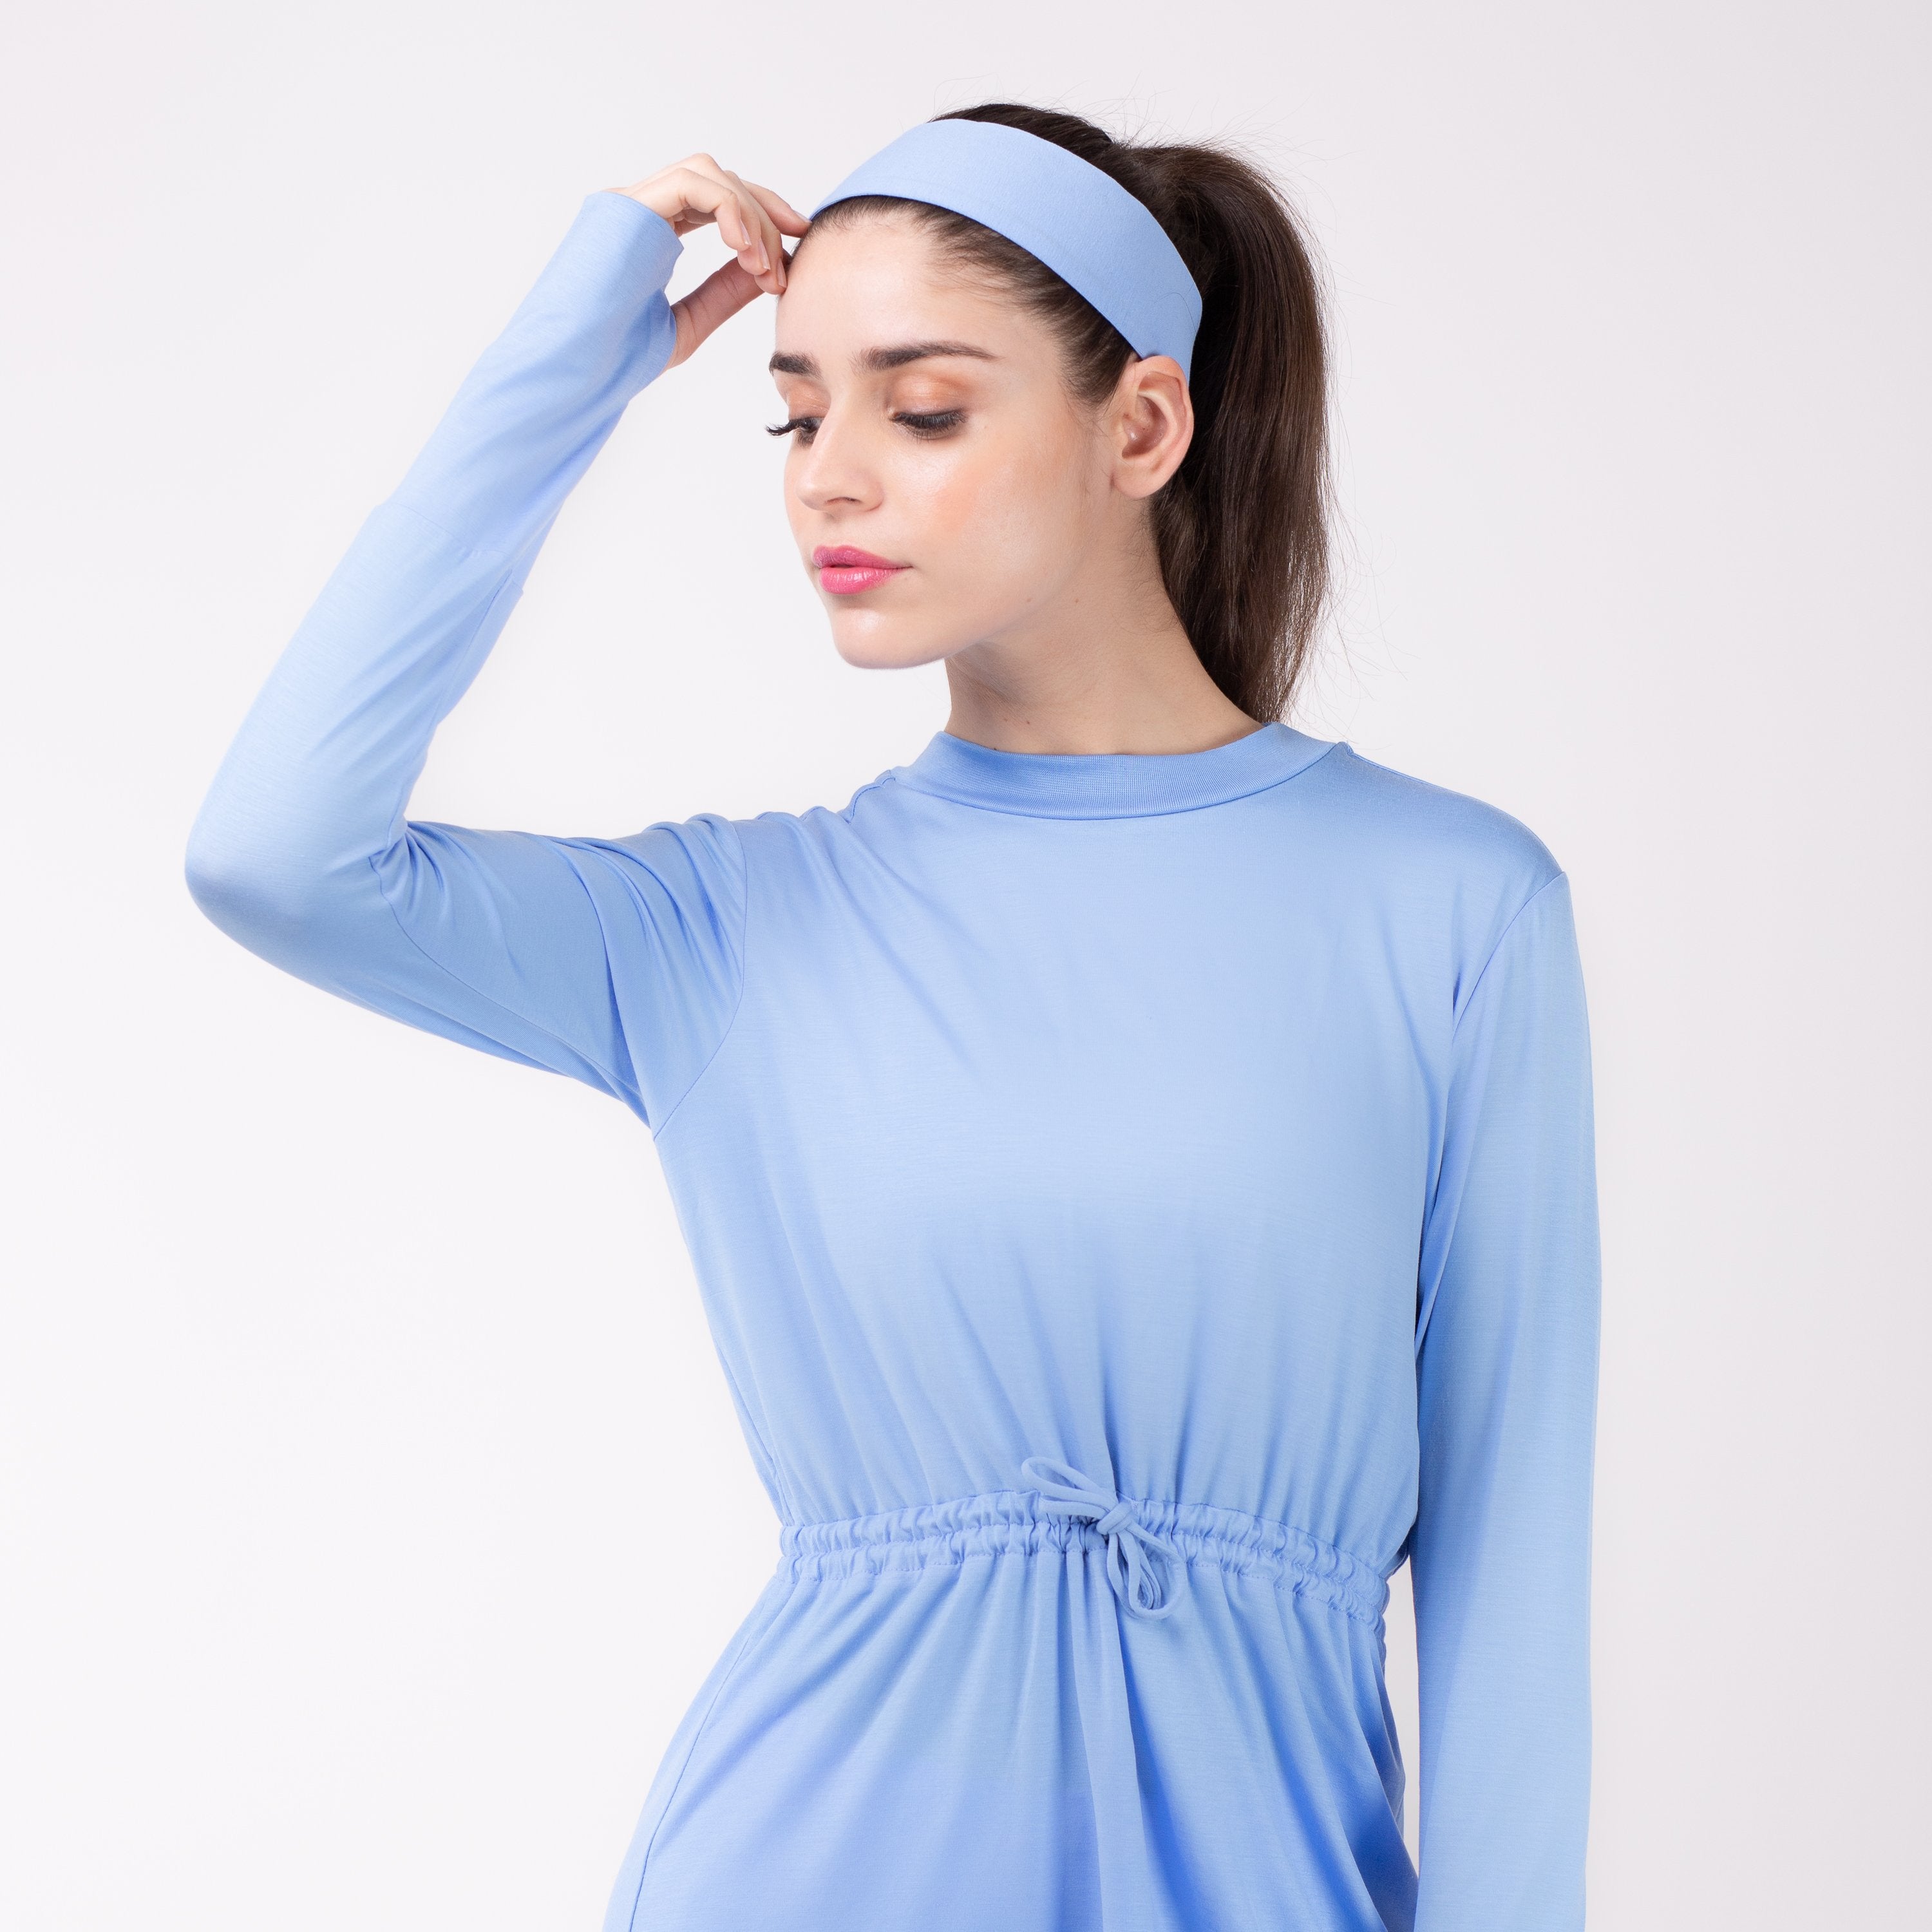 Woman looking left in sky blue shirt with matching sky blue HAWA headband.